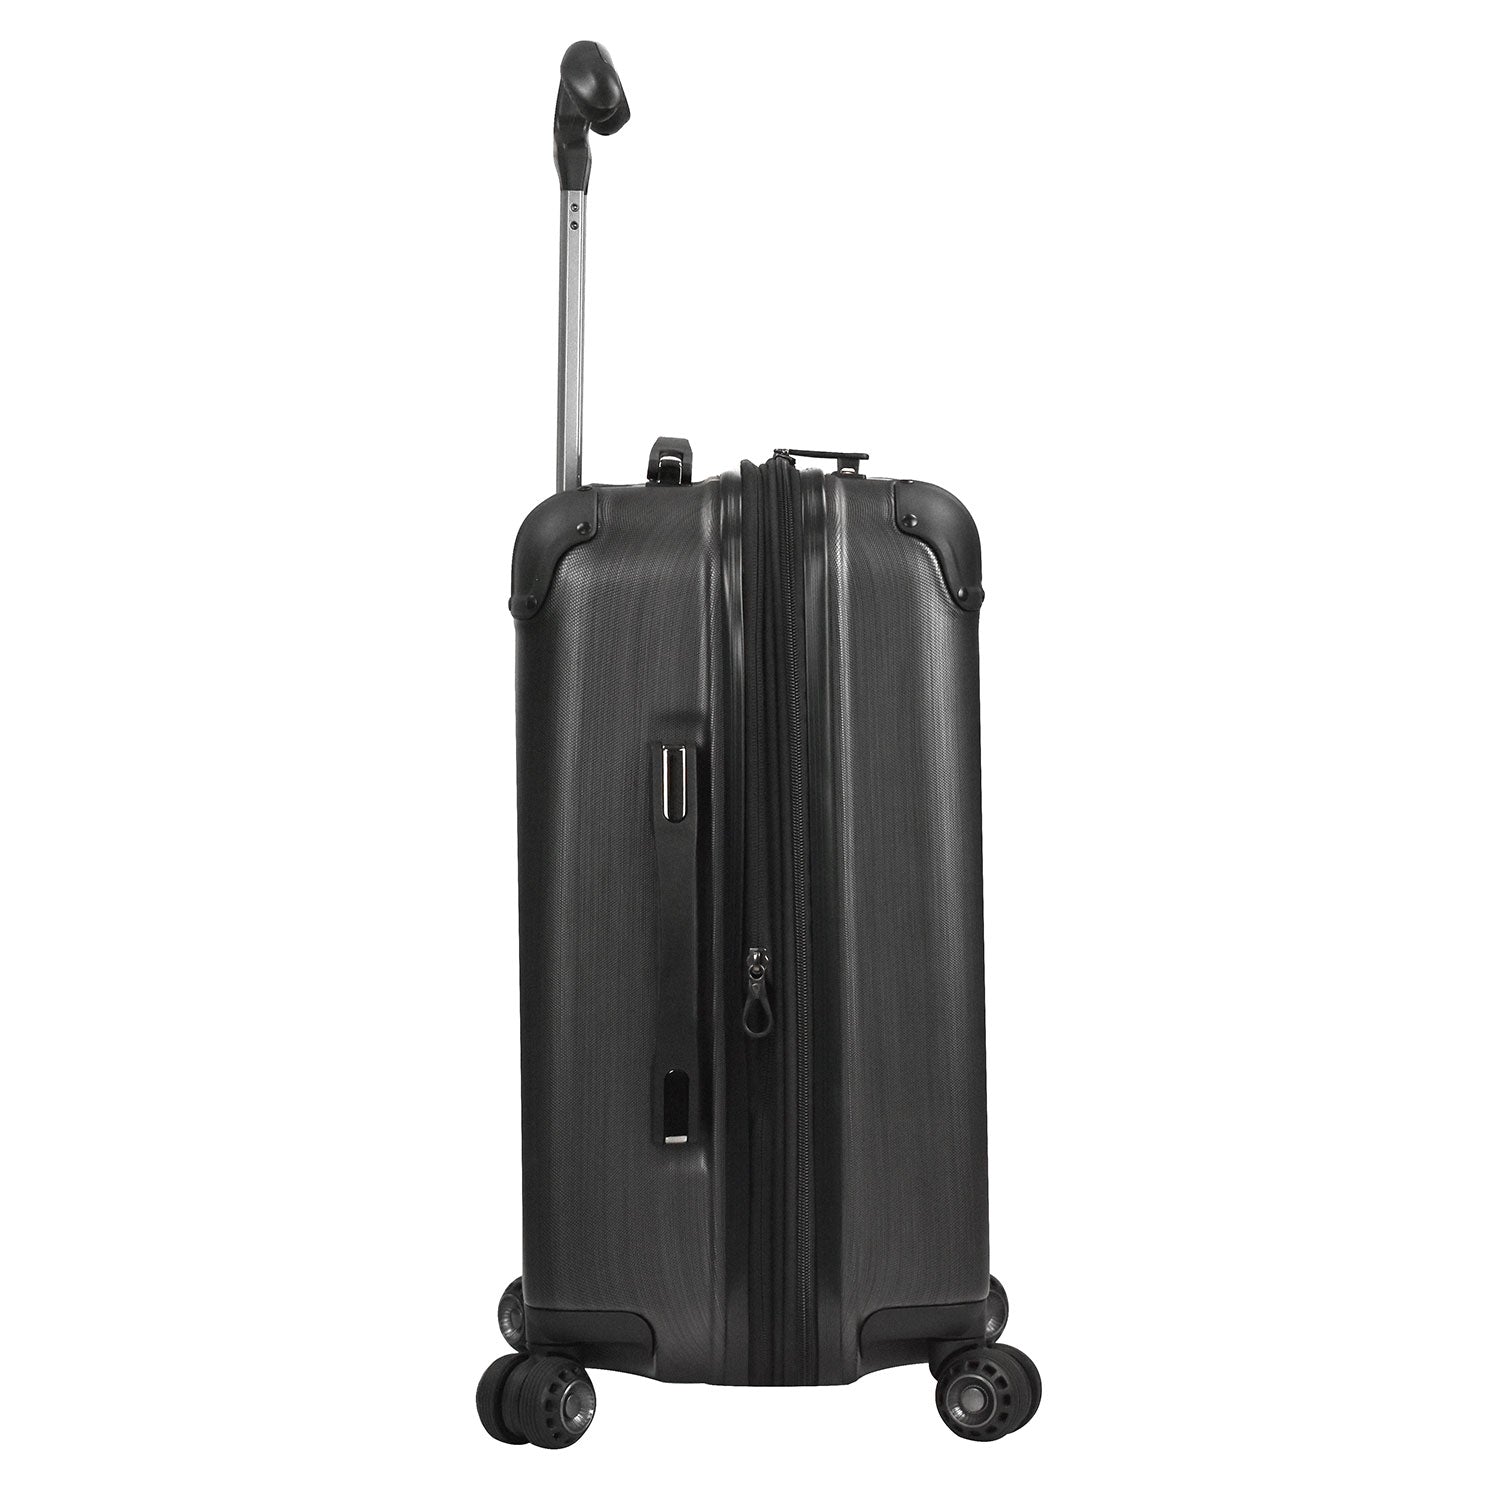 Silverwood Hardside Carry On Spinner Luggage